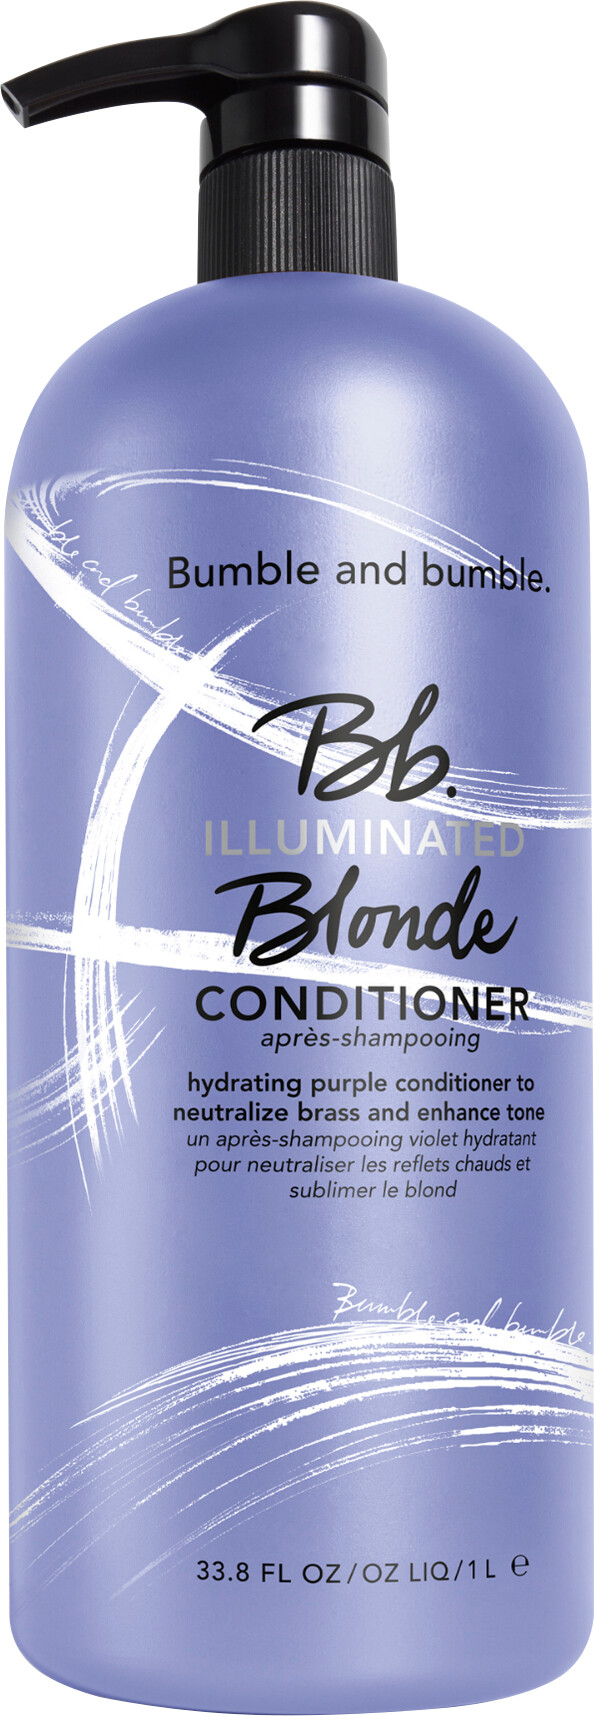 Bumble and bumble Bb. Illuminated Blonde Conditioner 1 litre